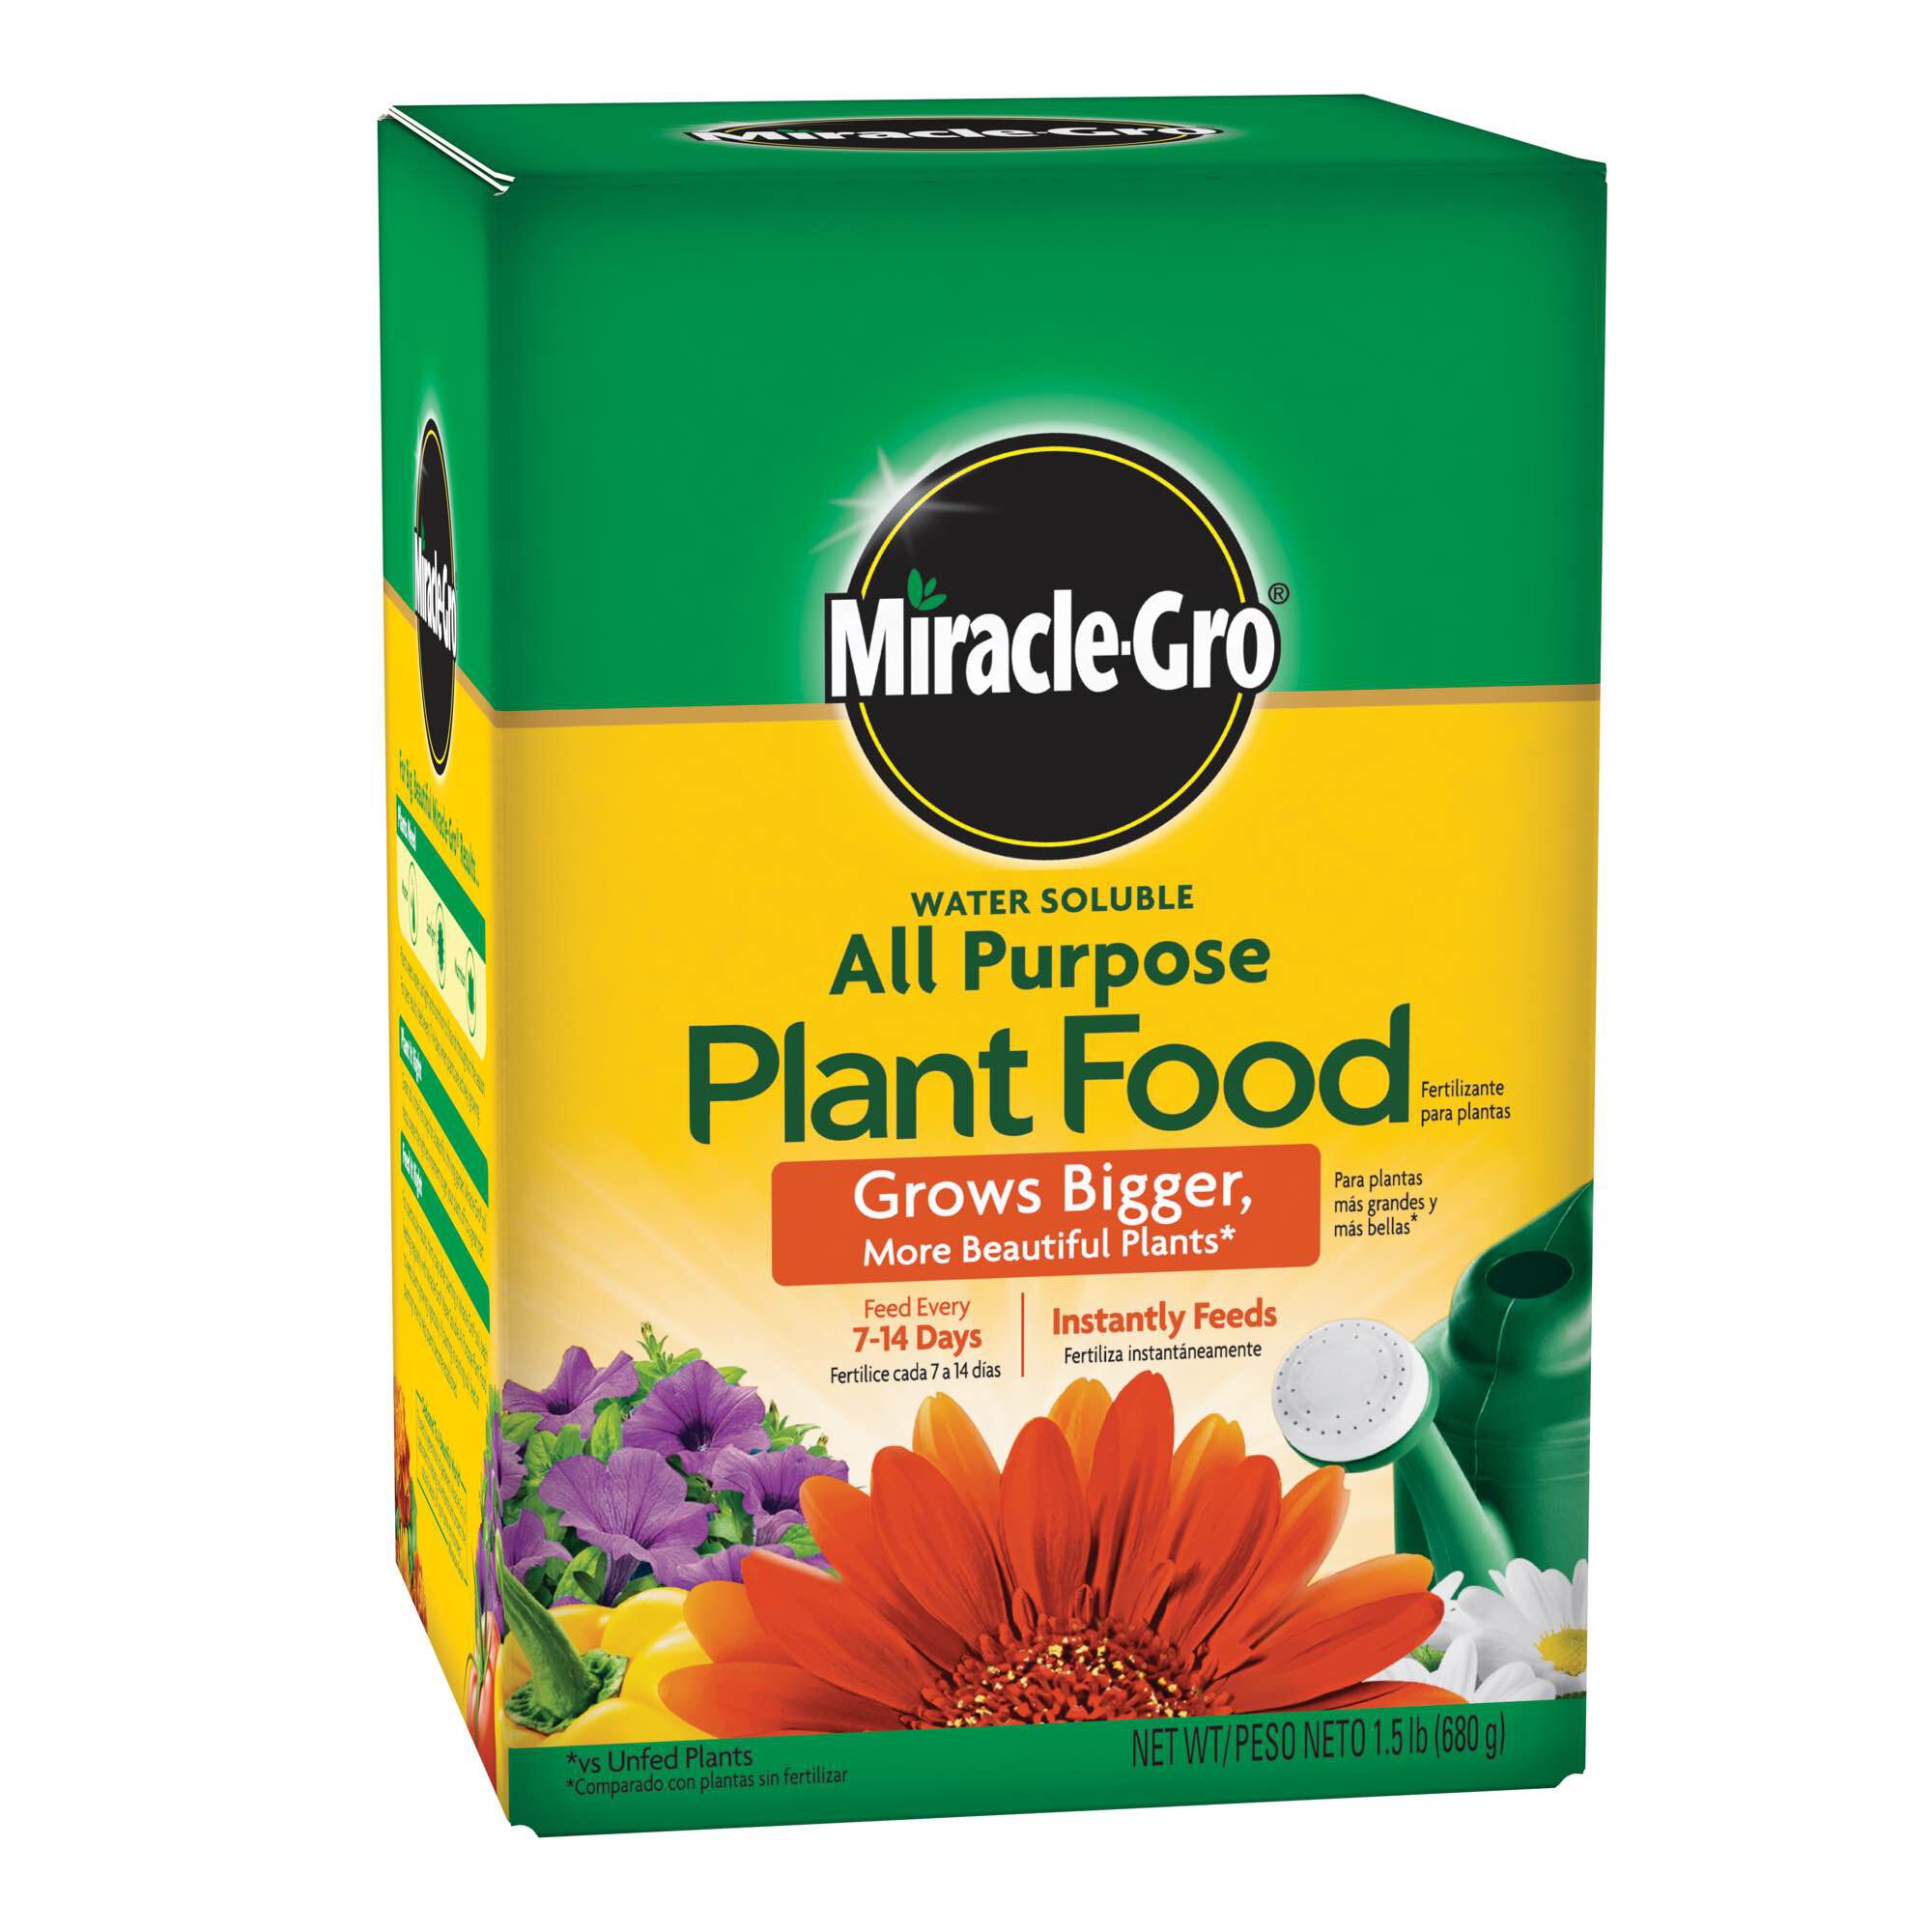 Image of Miracle-Gro All Purpose Plant Food free to use image